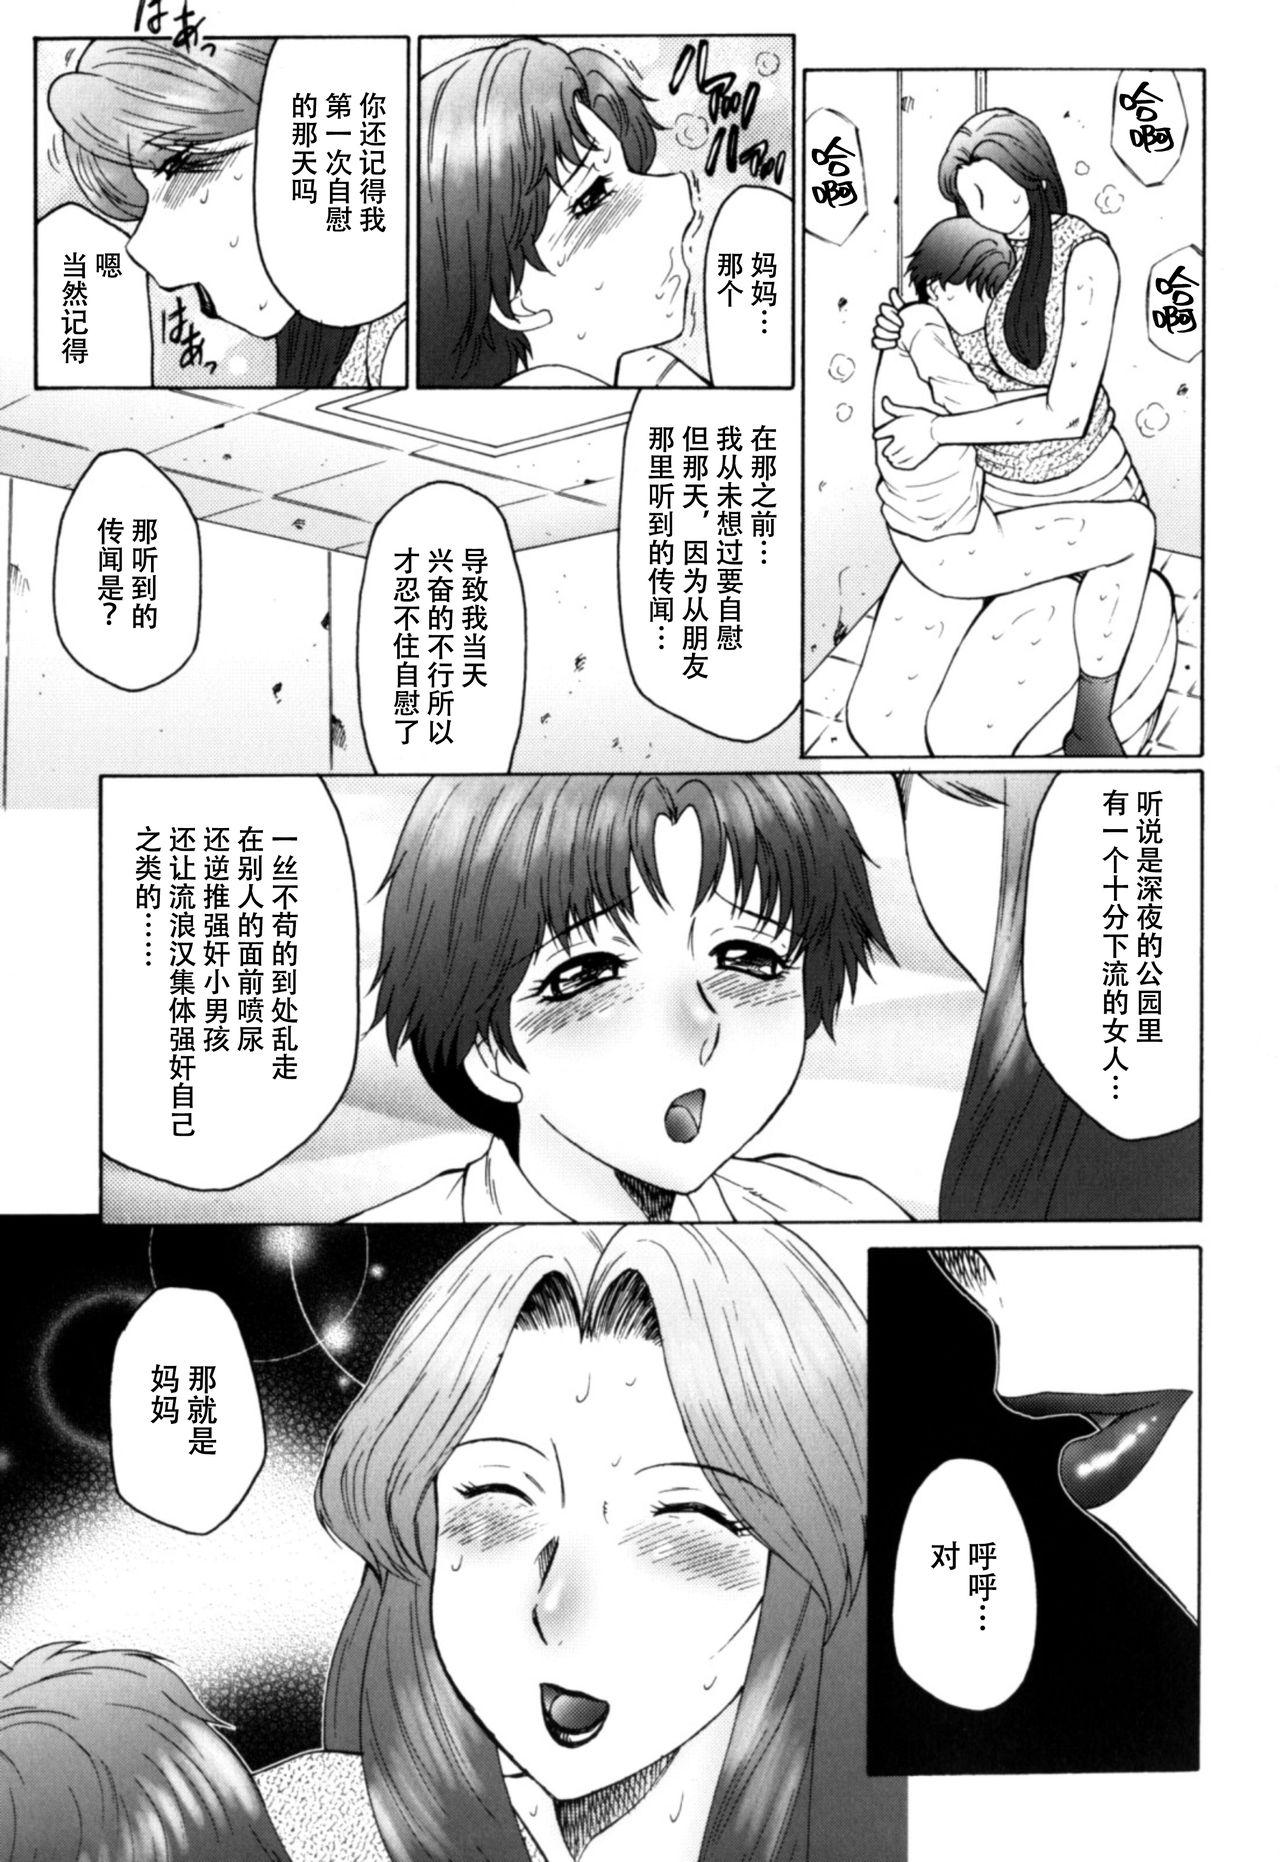 Piercings [Fuusen Club] Haha Mamire Ch. 9 [Chinese]【不可视汉化】 Domination - Page 6